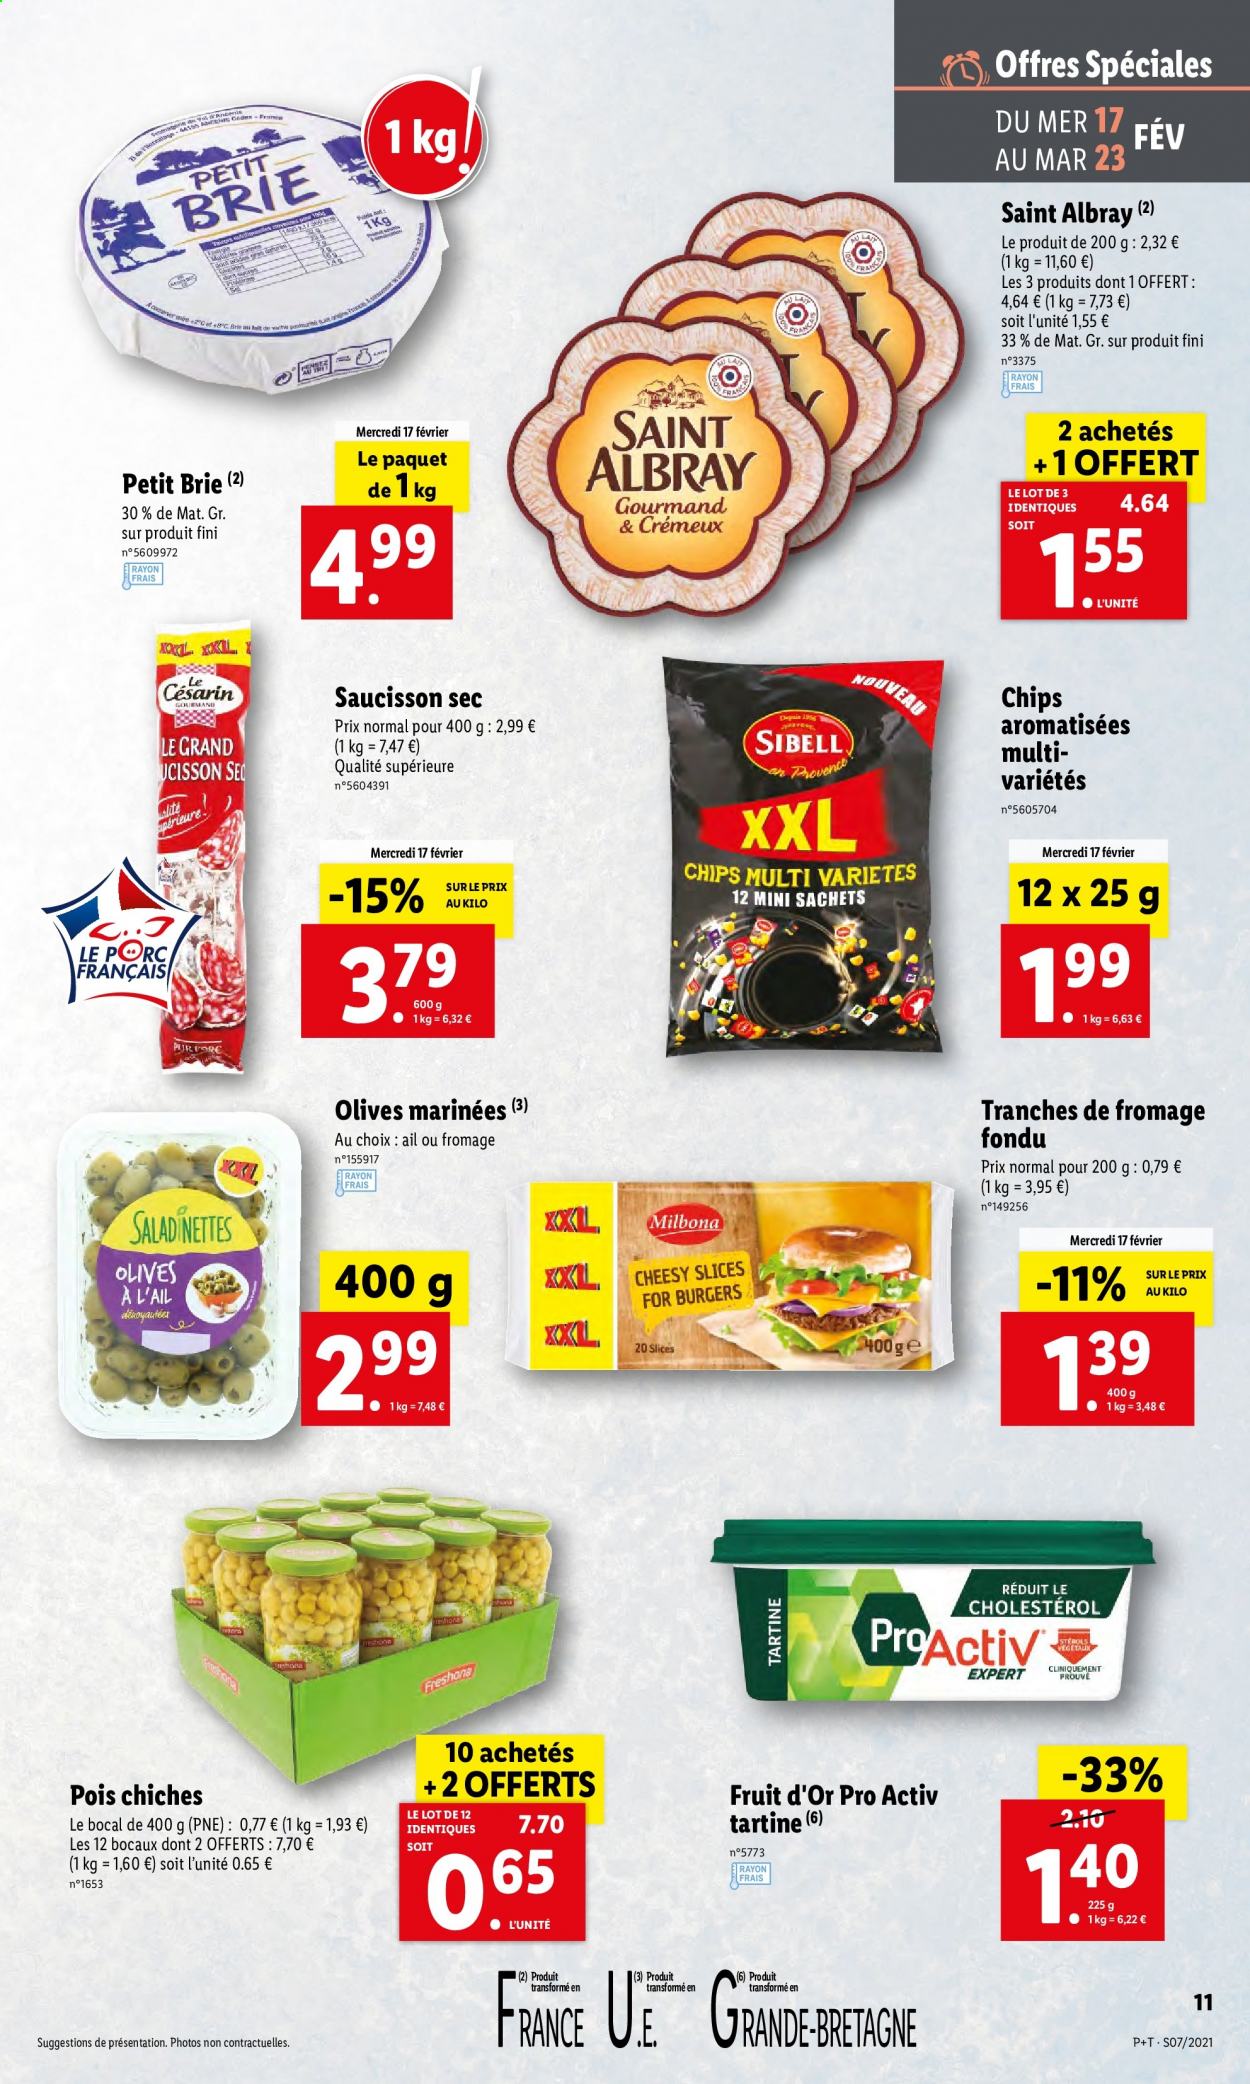 Catalogue Lidl - 17.02.2021 - 23.02.2021. Page 11.